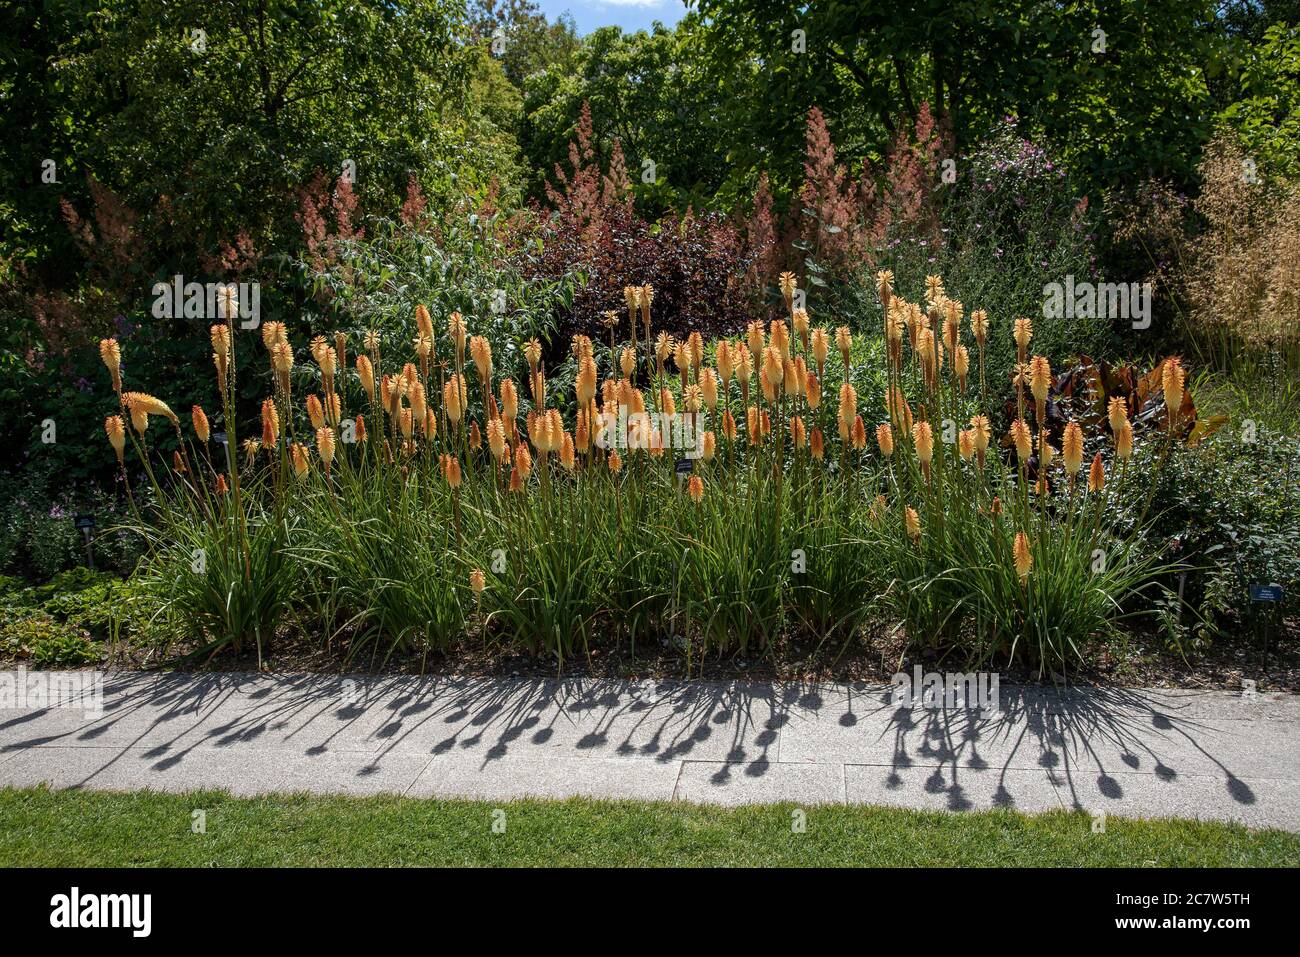 Hampshire, England, UK. 2020. An attractive area of flowering Kniphofia, 'Tawny King' variety of plants in an English country garden. Stock Photo